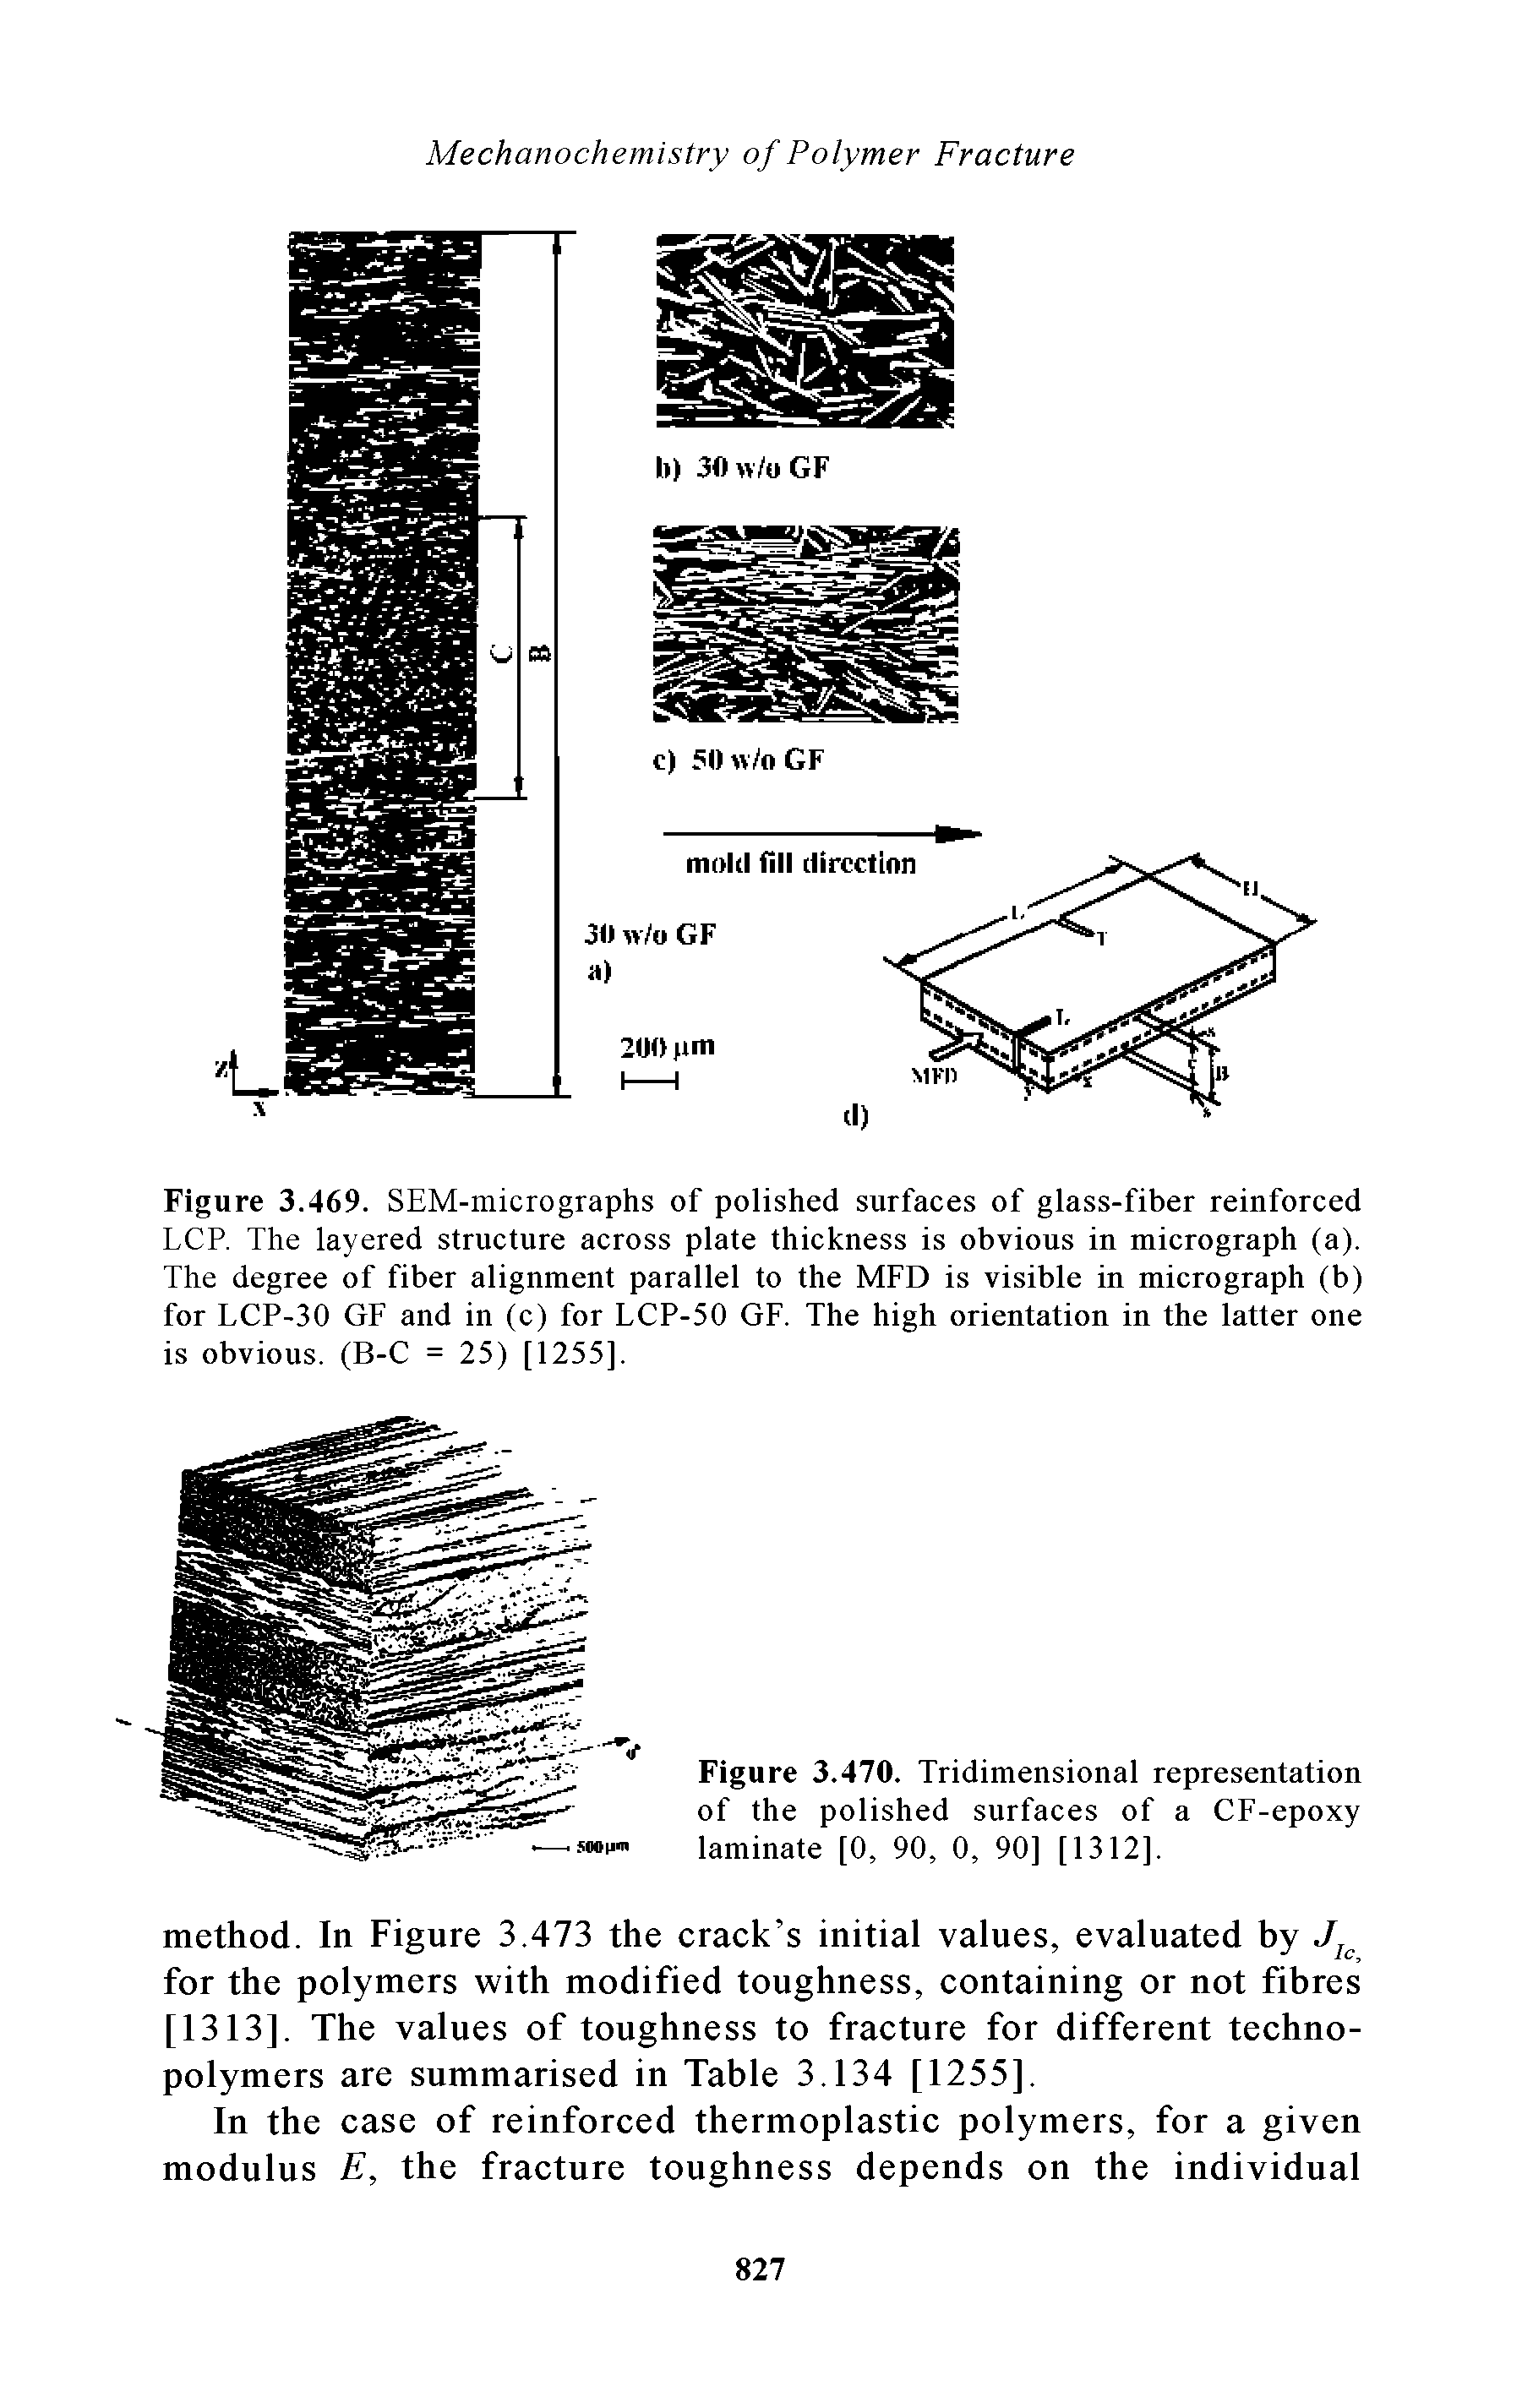 Figure 3.469. SEM-micrographs of polished surfaces of glass-fiber reinforced LCP. The layered structure across plate thickness is obvious in micrograph (a). The degree of fiber alignment parallel to the MFD is visible in micrograph (b) for LCP-30 GF and in (c) for LCP-50 GF. The high orientation in the latter one is obvious. (B-C = 25) [1255],...